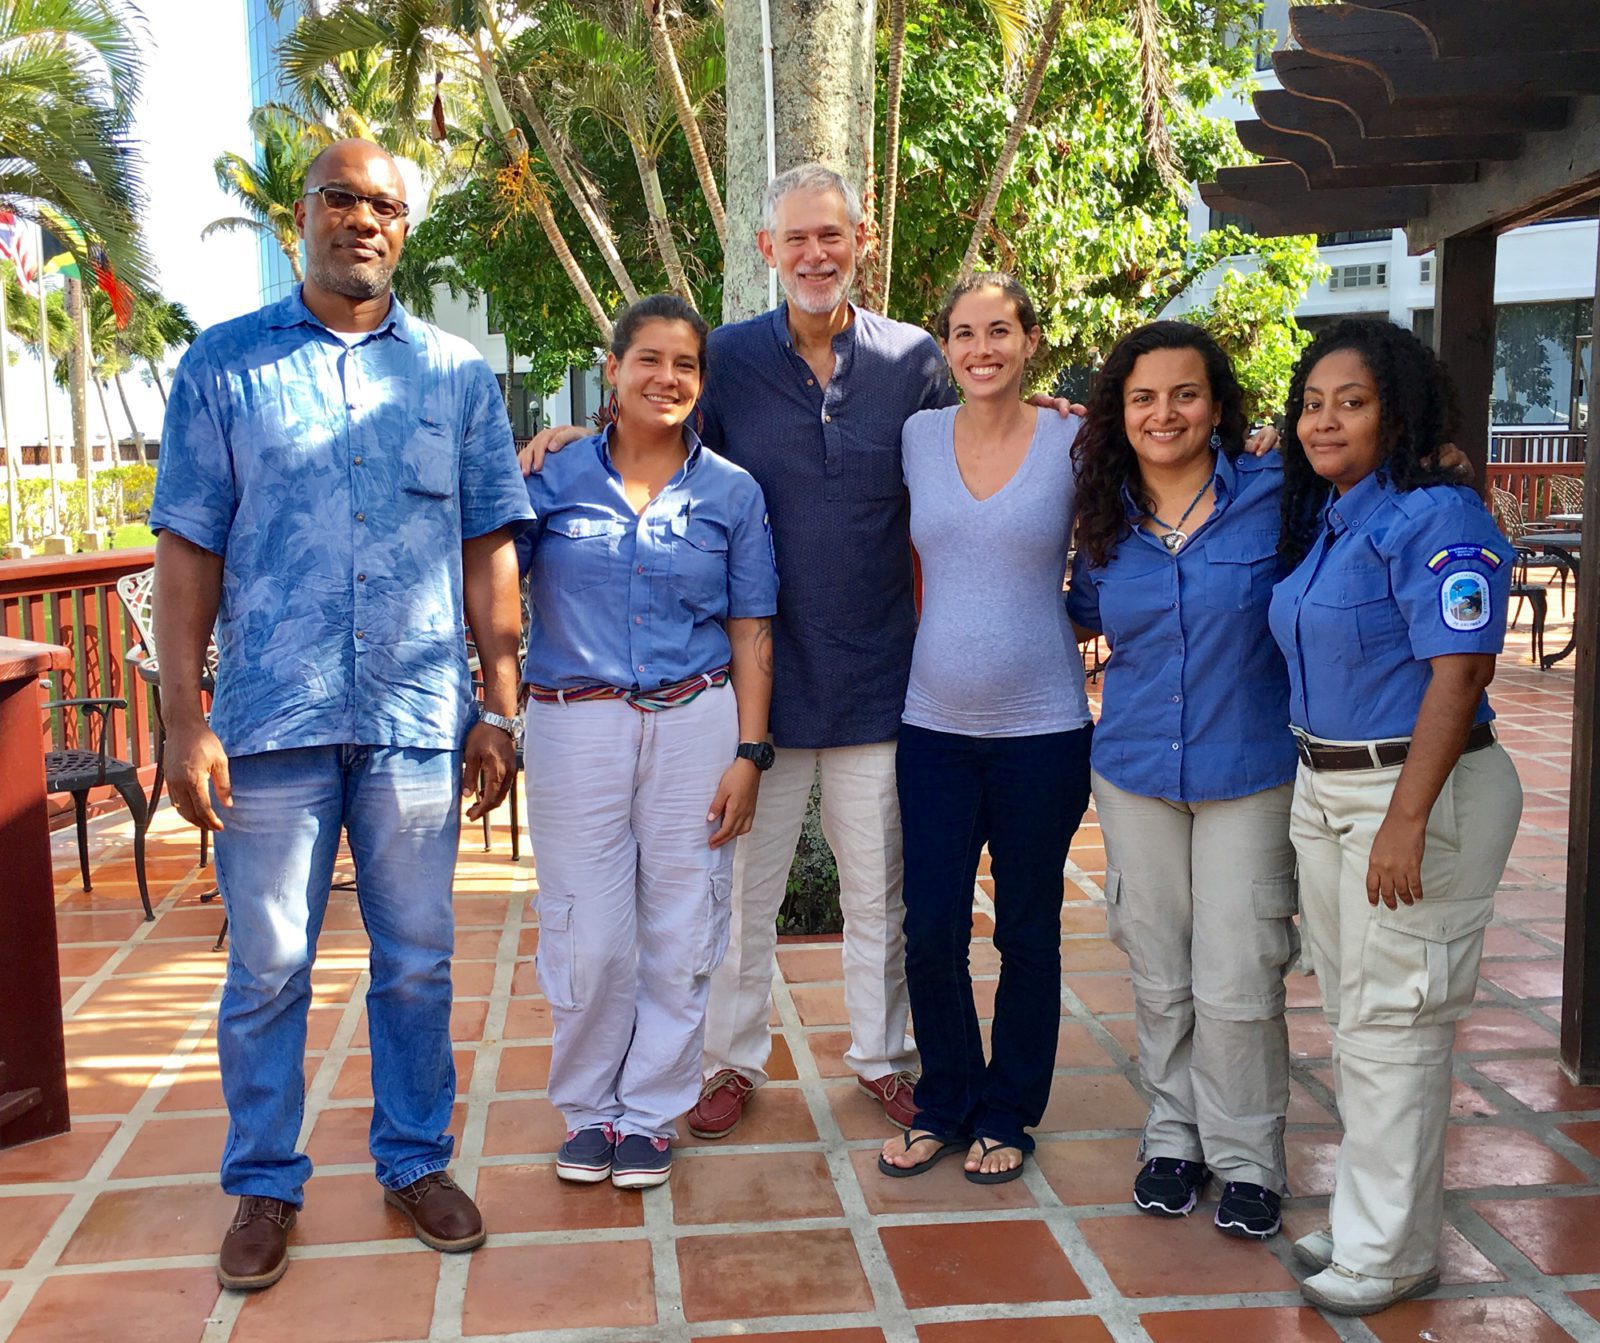 The four Colombian exchange delegates with Phil Karp and Jen Chapman, Blue Ventures' Country Coordinator in Belize.